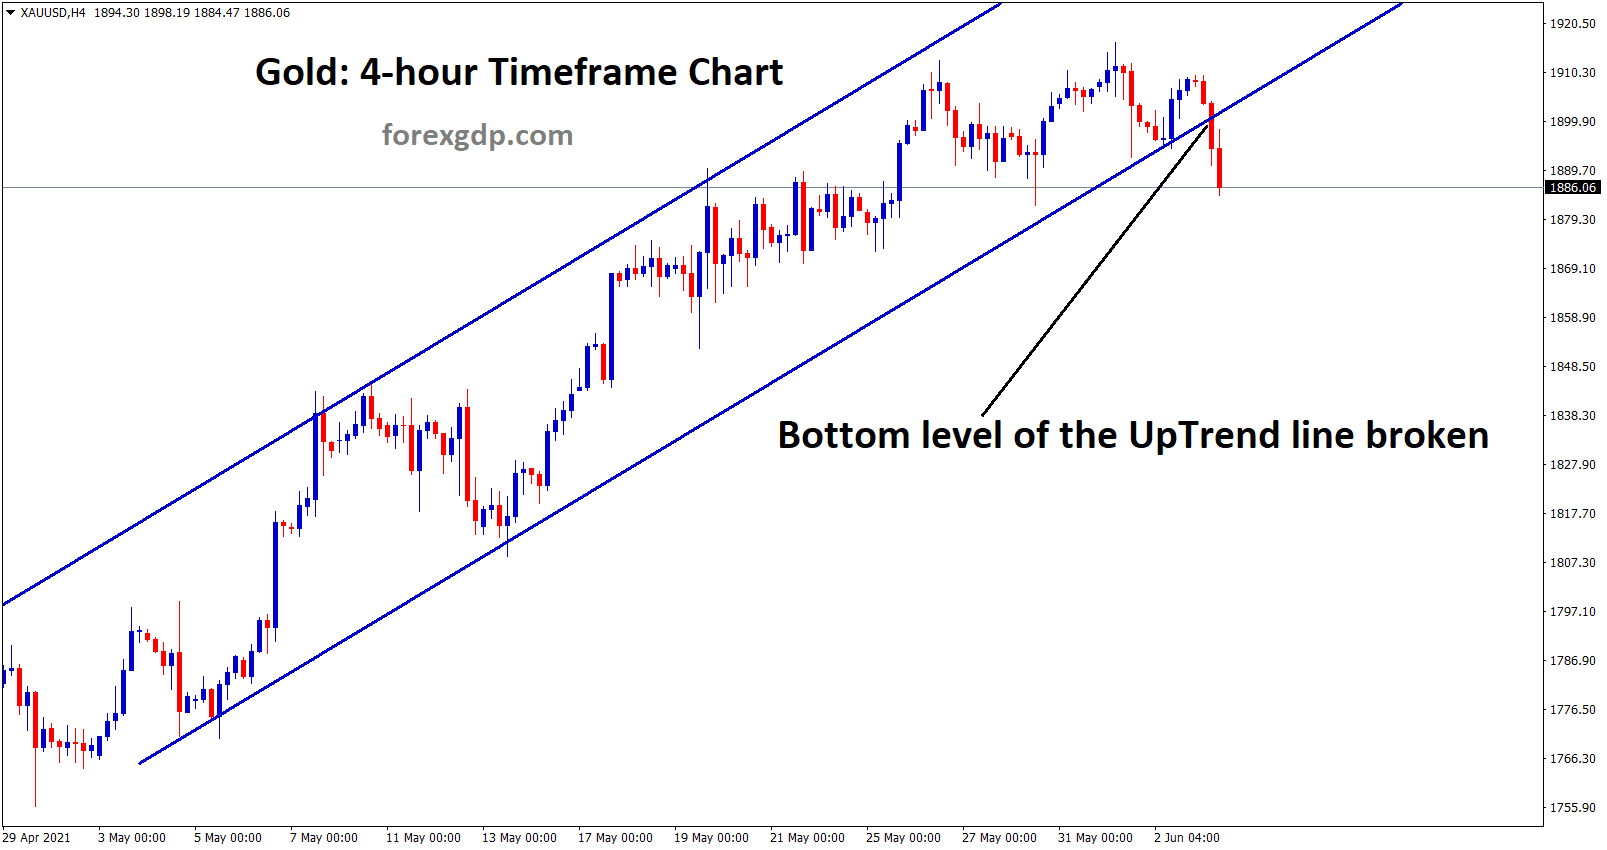 Gold has broken the bottom level of the uptrend line after a long time.